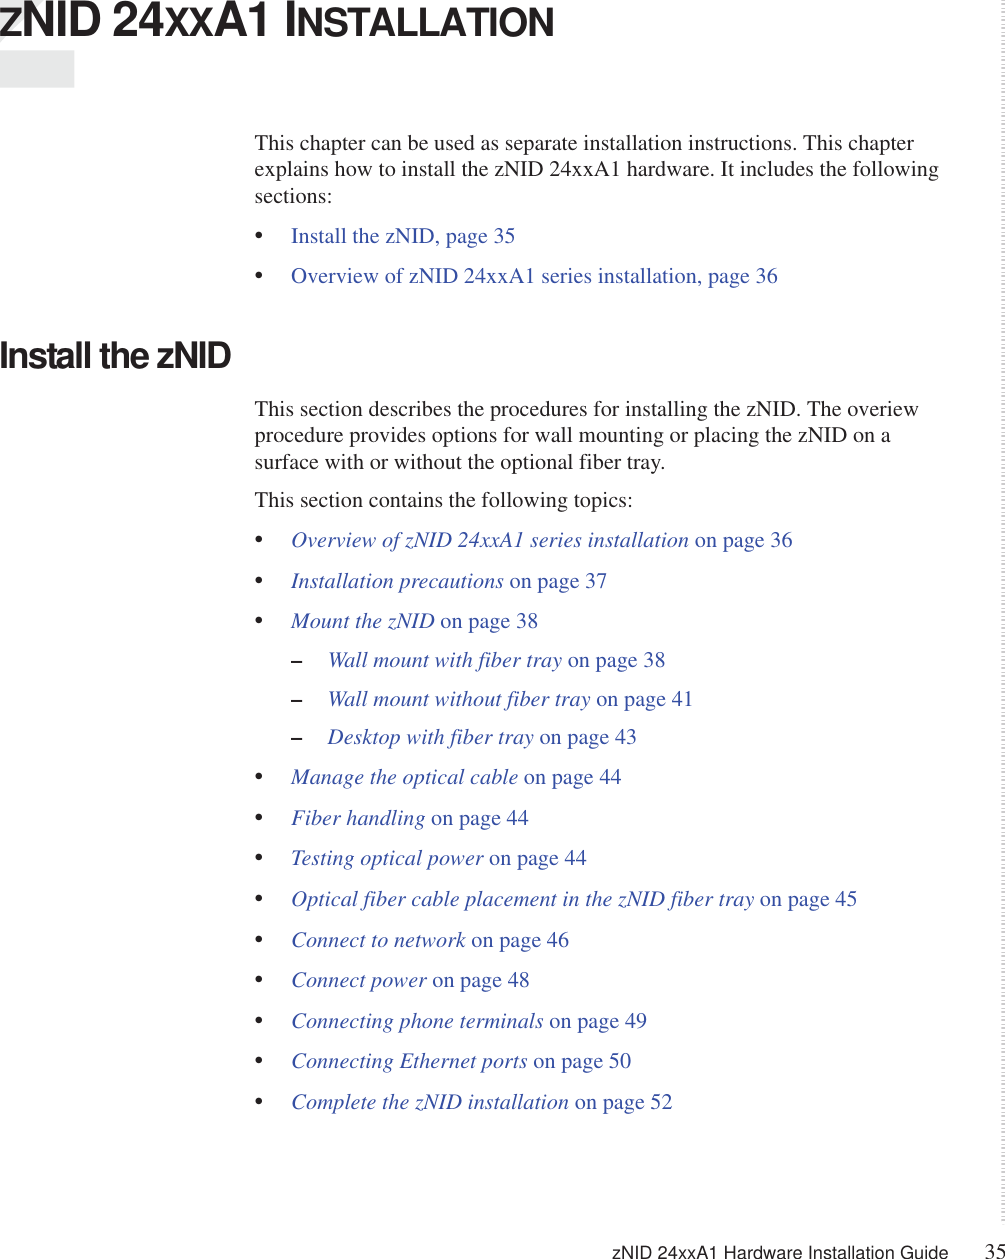 zNID 24xxA1 Hardware Installation Guide 35  ZNID 24XXA1 INSTALLATIONThis chapter can be used as separate installation instructions. This chapter explains how to install the zNID 24xxA1 hardware. It includes the following sections:•Install the zNID, page 35•Overview of zNID 24xxA1 series installation, page 36Install the zNIDThis section describes the procedures for installing the zNID. The overiew procedure provides options for wall mounting or placing the zNID on a surface with or without the optional fiber tray.This section contains the following topics:•Overview of zNID 24xxA1 series installation on page 36•Installation precautions on page 37•Mount the zNID on page 38–Wall mount with fiber tray on page 38–Wall mount without fiber tray on page 41–Desktop with fiber tray on page 43•Manage the optical cable on page 44•Fiber handling on page 44•Testing optical power on page 44•Optical fiber cable placement in the zNID fiber tray on page 45•Connect to network on page 46•Connect power on page 48•Connecting phone terminals on page 49•Connecting Ethernet ports on page 50•Complete the zNID installation on page 52